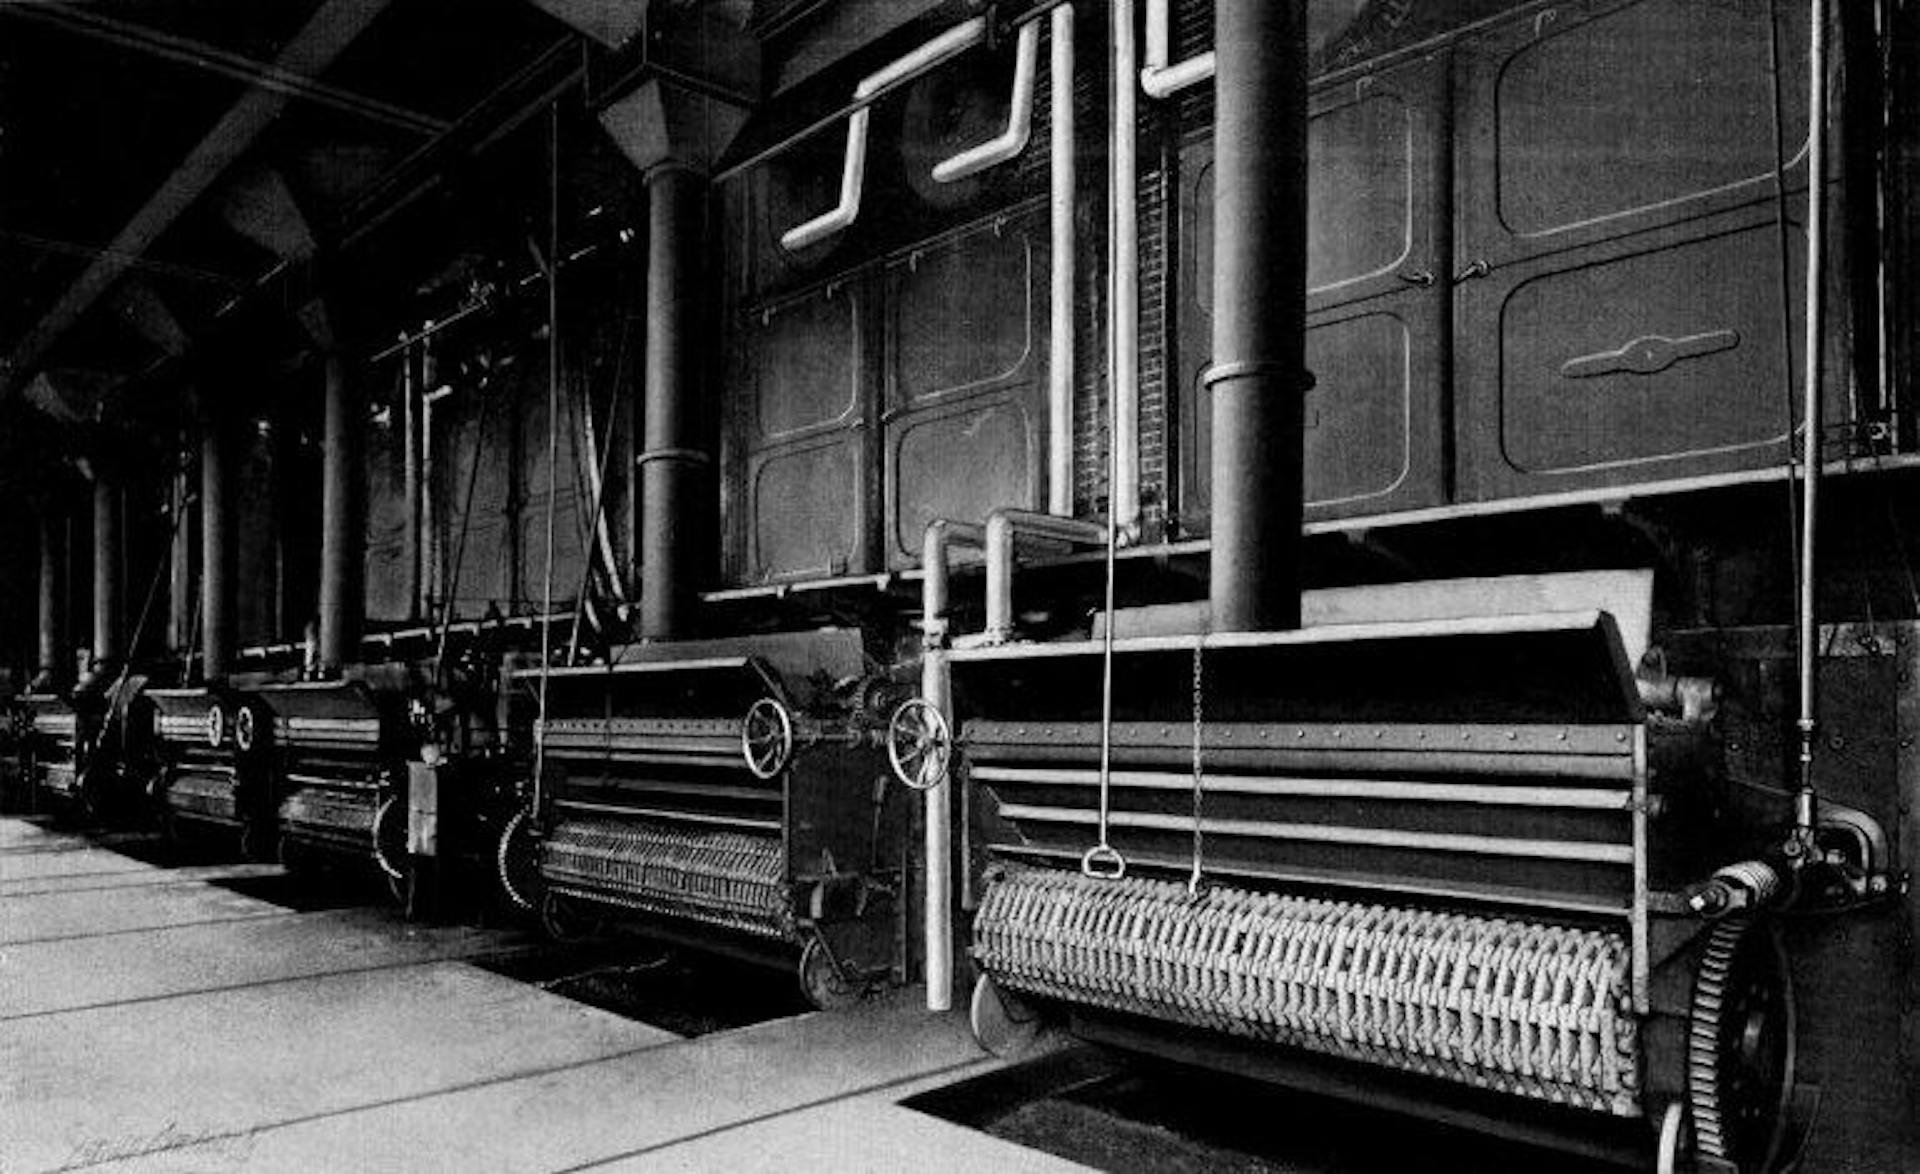 Portion of 6100 Horse-power Installation of Babcock & Wilcox Boilers Equipped with Babcock & Wilcox Chain Grate Stokers at the Campbell Street Plant of the Louisville Railway Co., Louisville, Ky. This Company Operates a Total of 14,000 Horse Power of Babcock & Wilcox Boilers